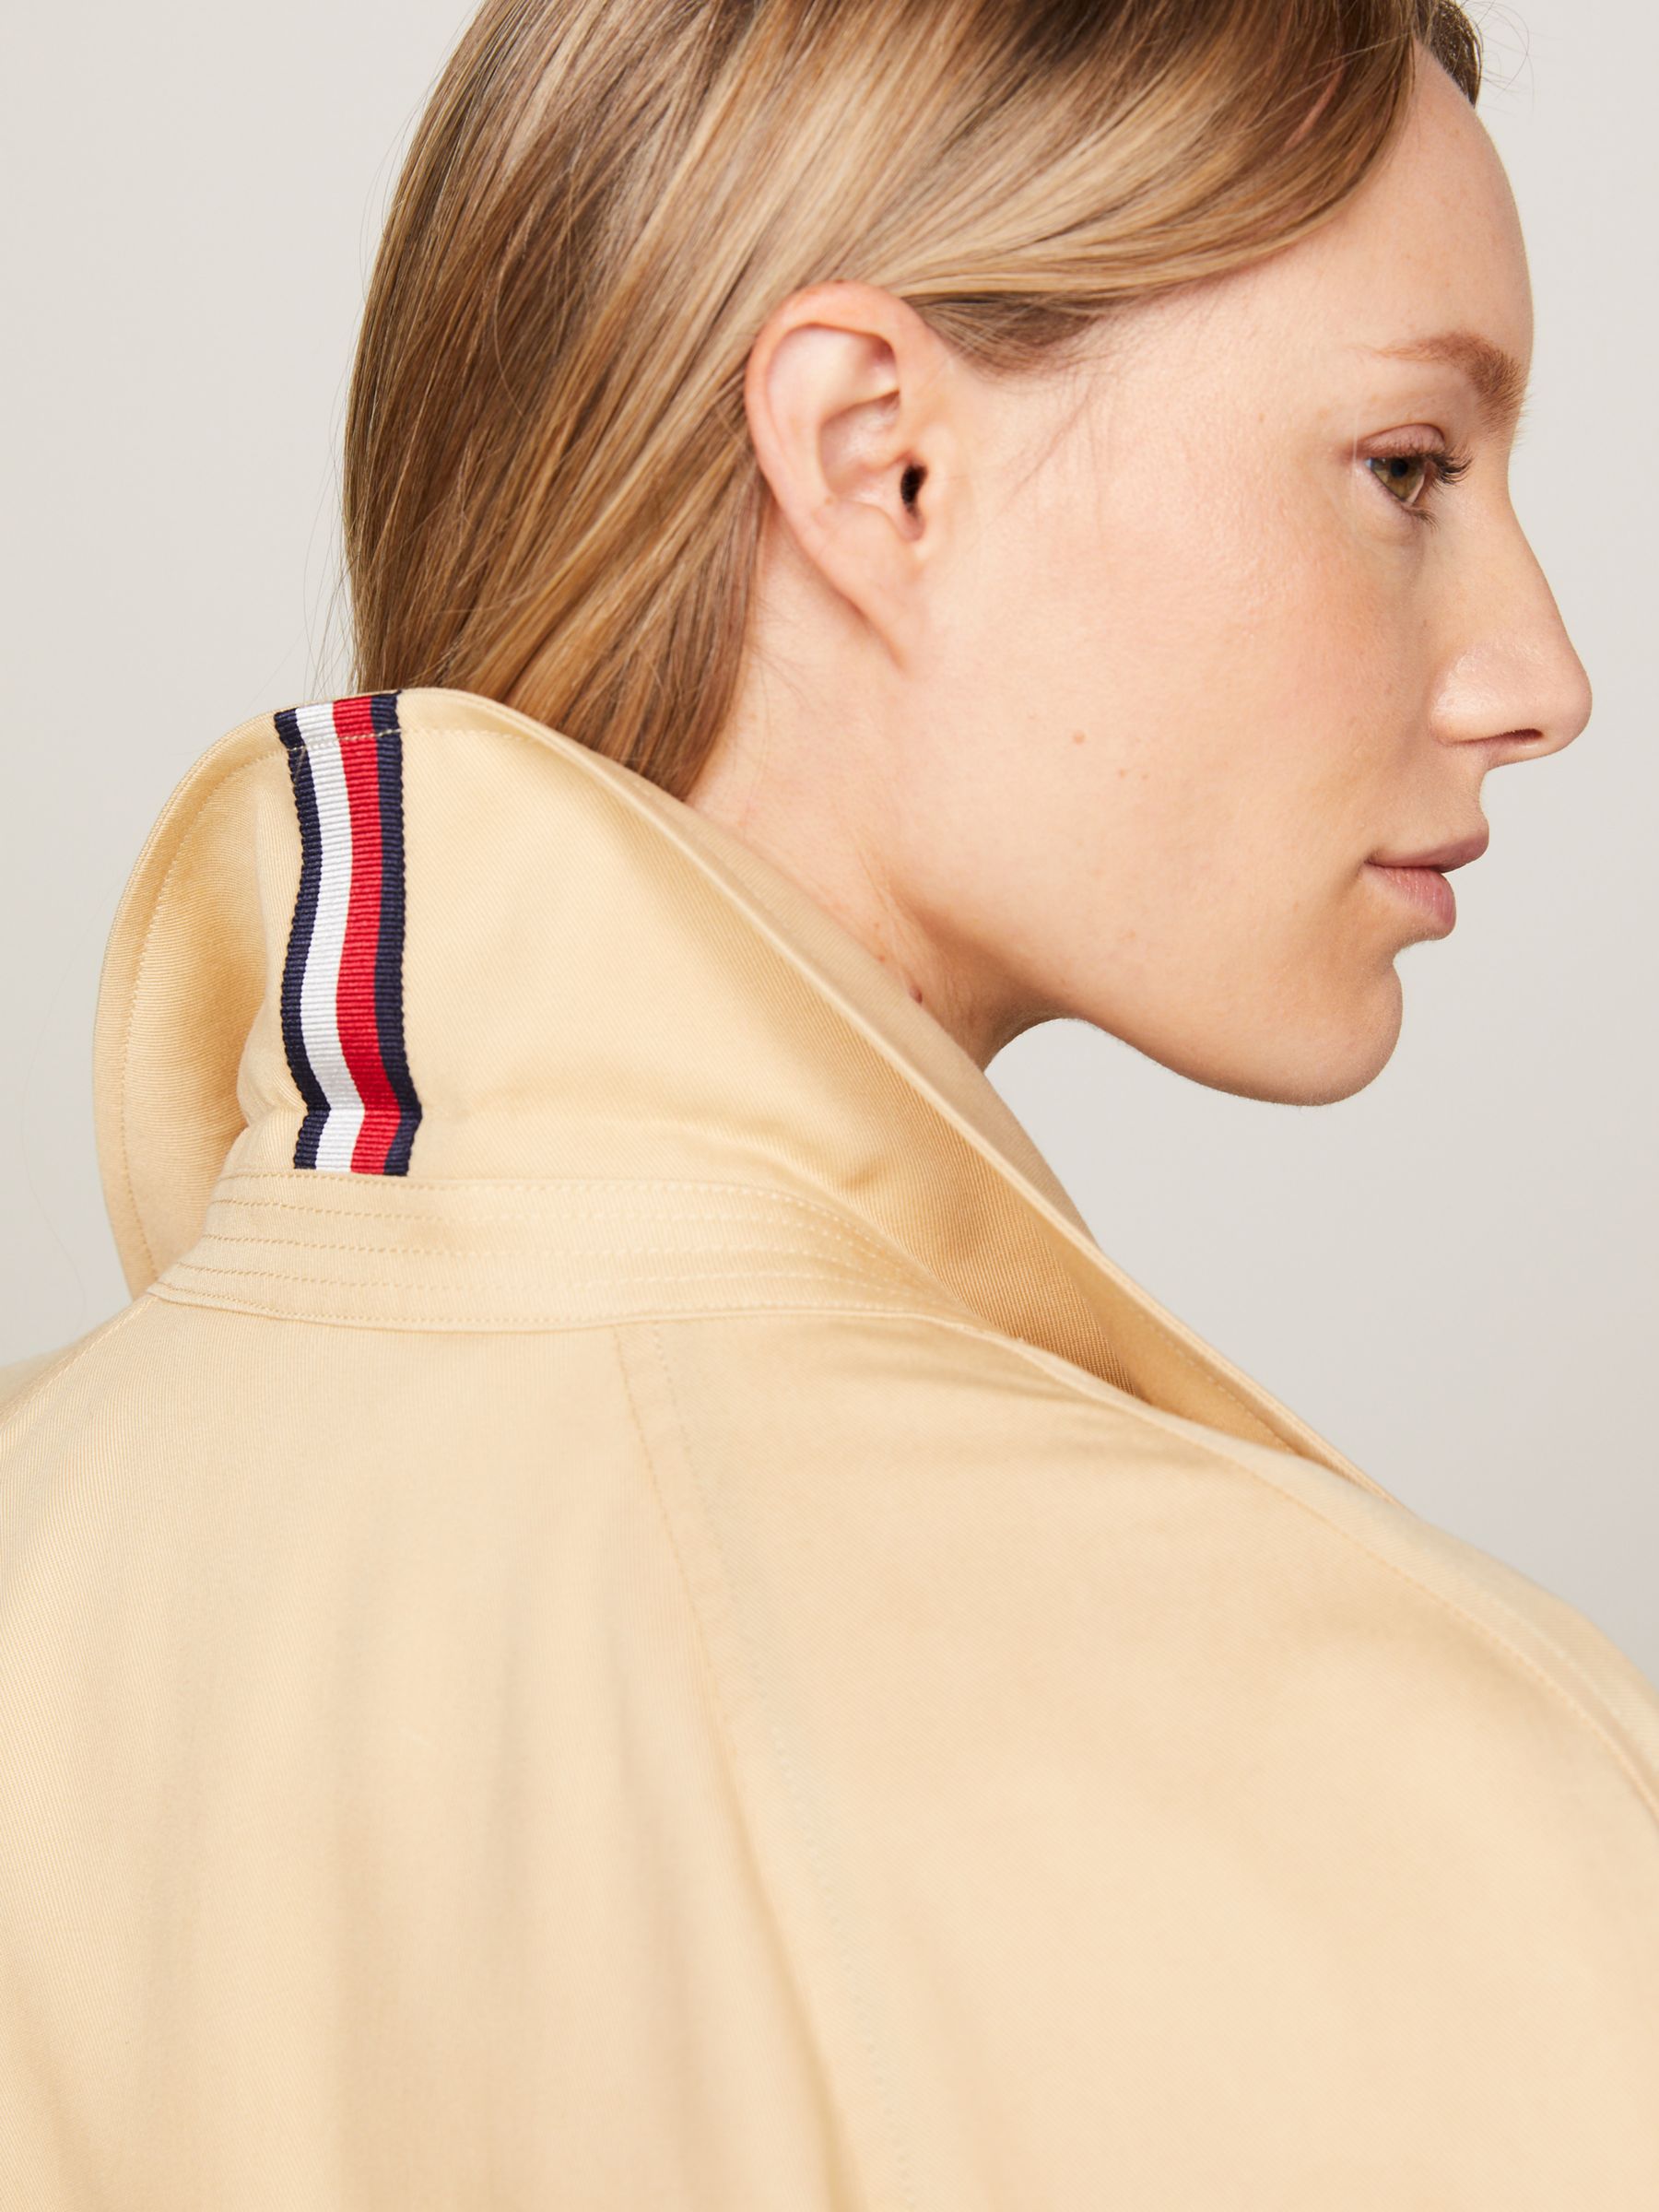 Buy Tommy Hilfiger Fluid Double Breasted Trench Coat, Harvest Wheat Online at johnlewis.com